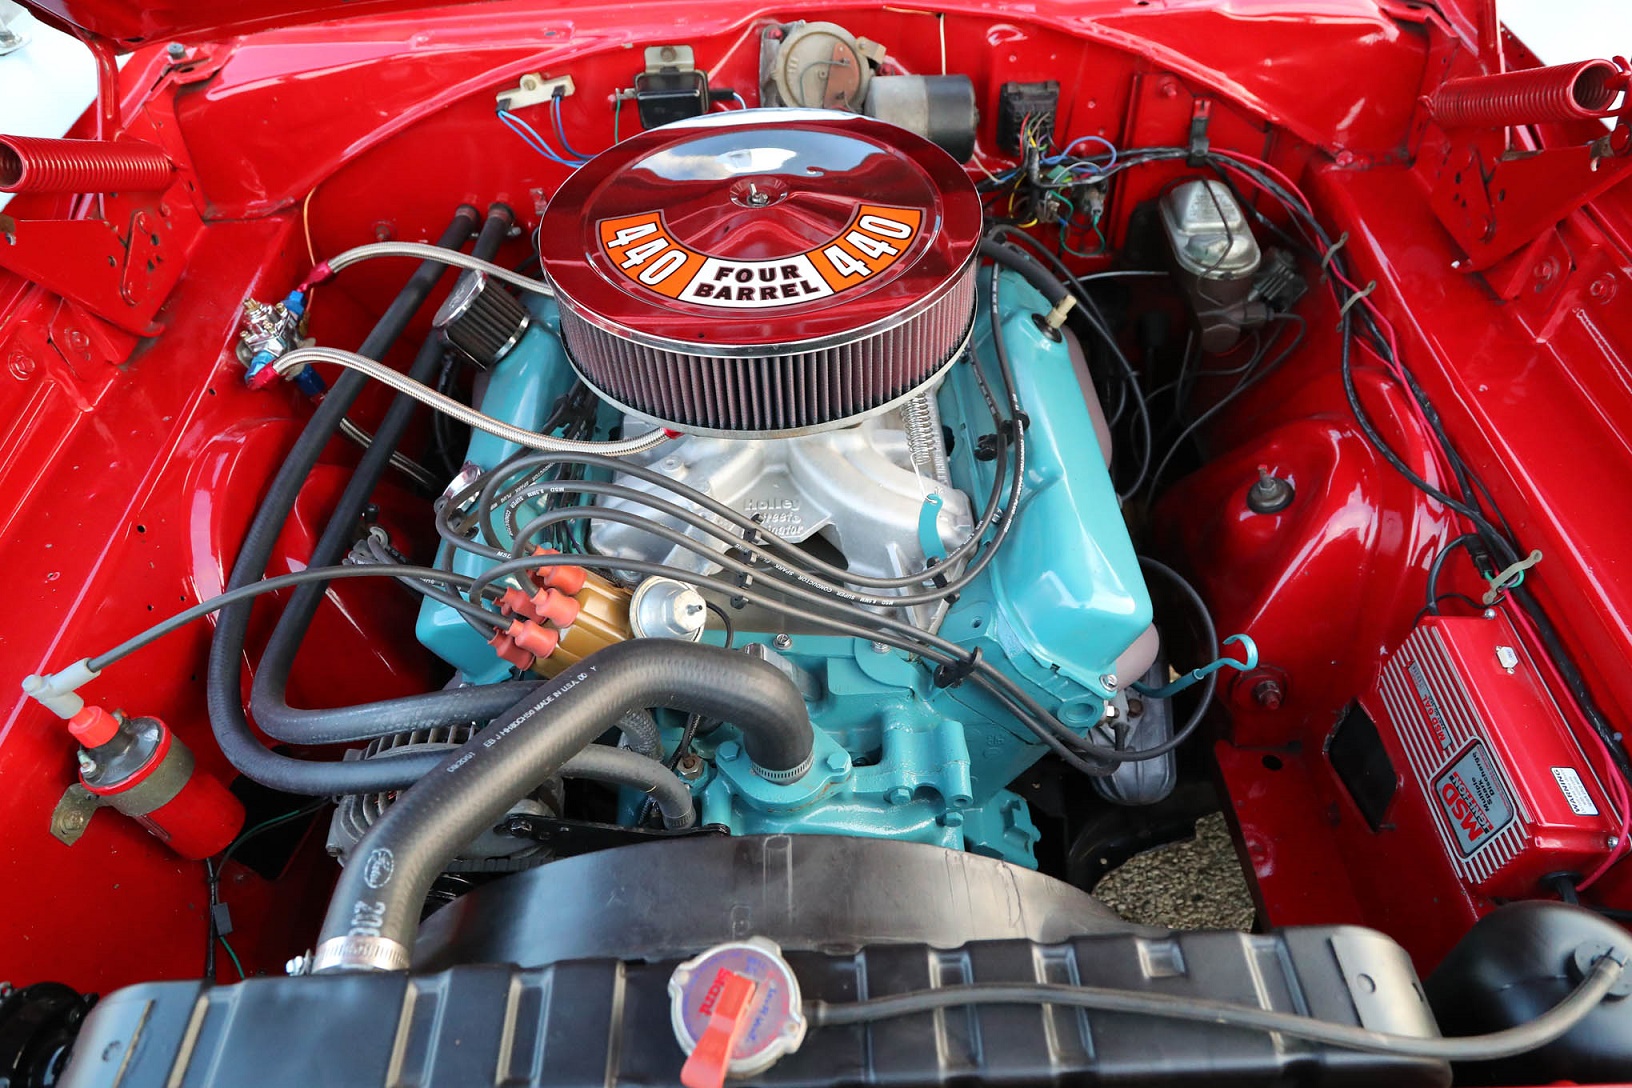 Attached picture 063-2016-drag-week-hot-rod-engines-horsepower.jpg